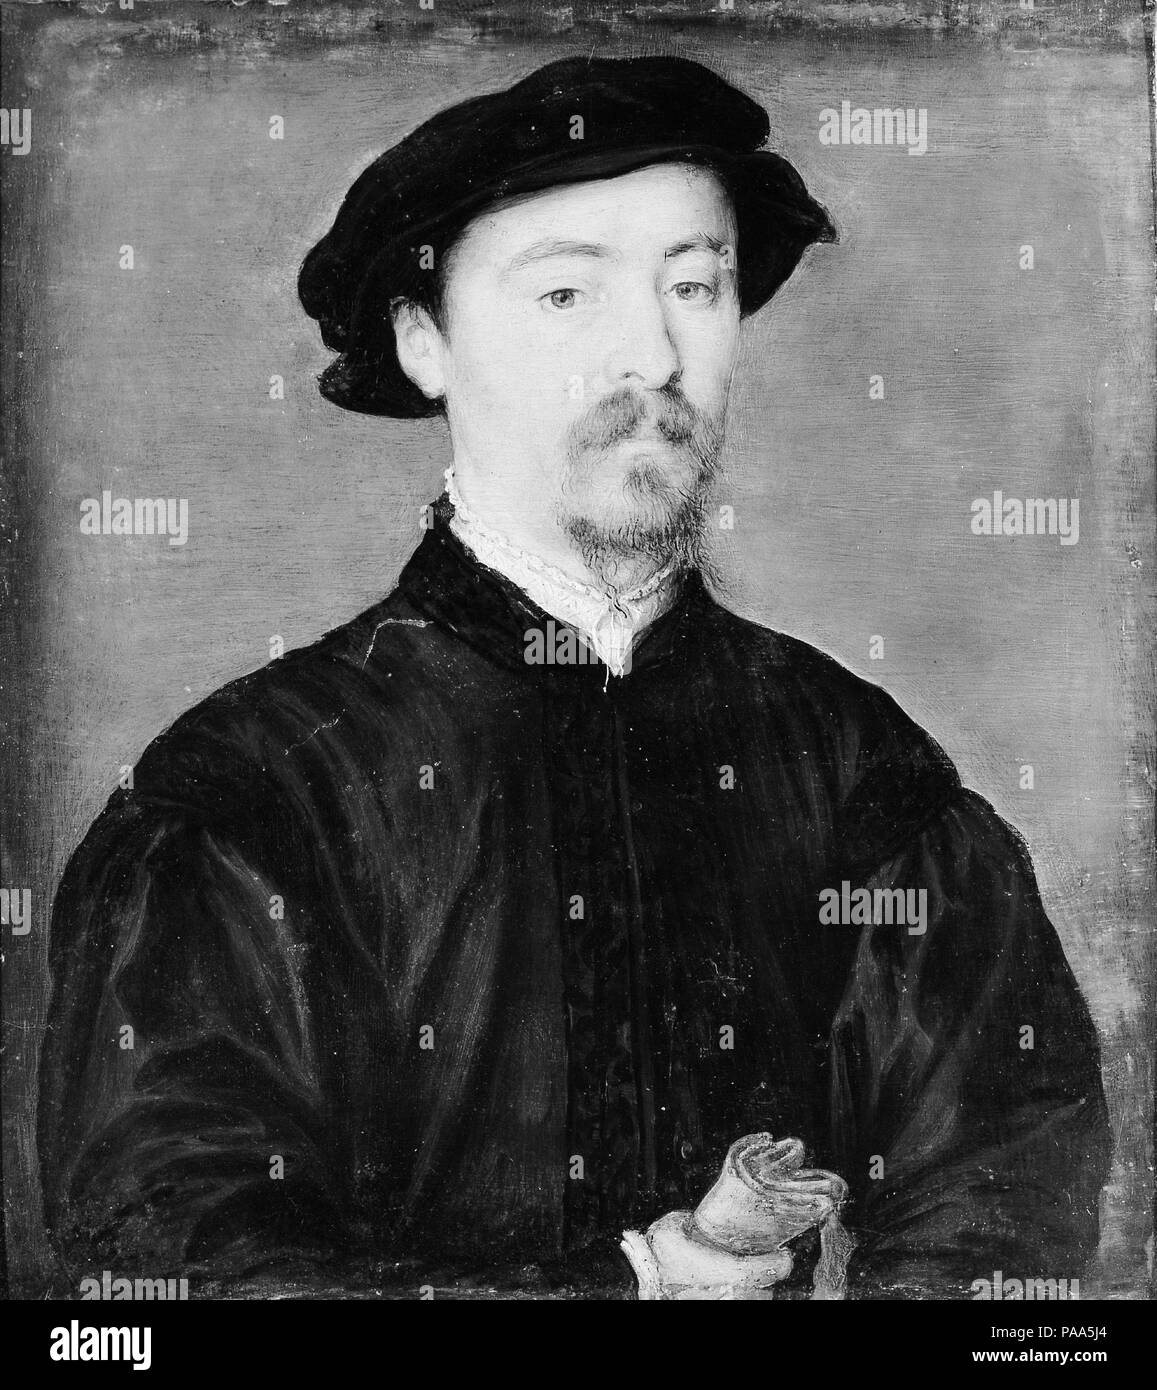 Portrait of a Man with Gloves. Artist: Attributed to Corneille de Lyon (Netherlandish, The Hague, active by 1533-died 1575 Lyons). Dimensions: 6 7/8 x 6 1/2 in. (17.5 x 16.5 cm). Date: 1540-45.  The striking formality of the pose of this sitter holding gloves, and his direct address of the viewer, may indicate his prominent position in society. Museum: Metropolitan Museum of Art, New York, USA. Stock Photo